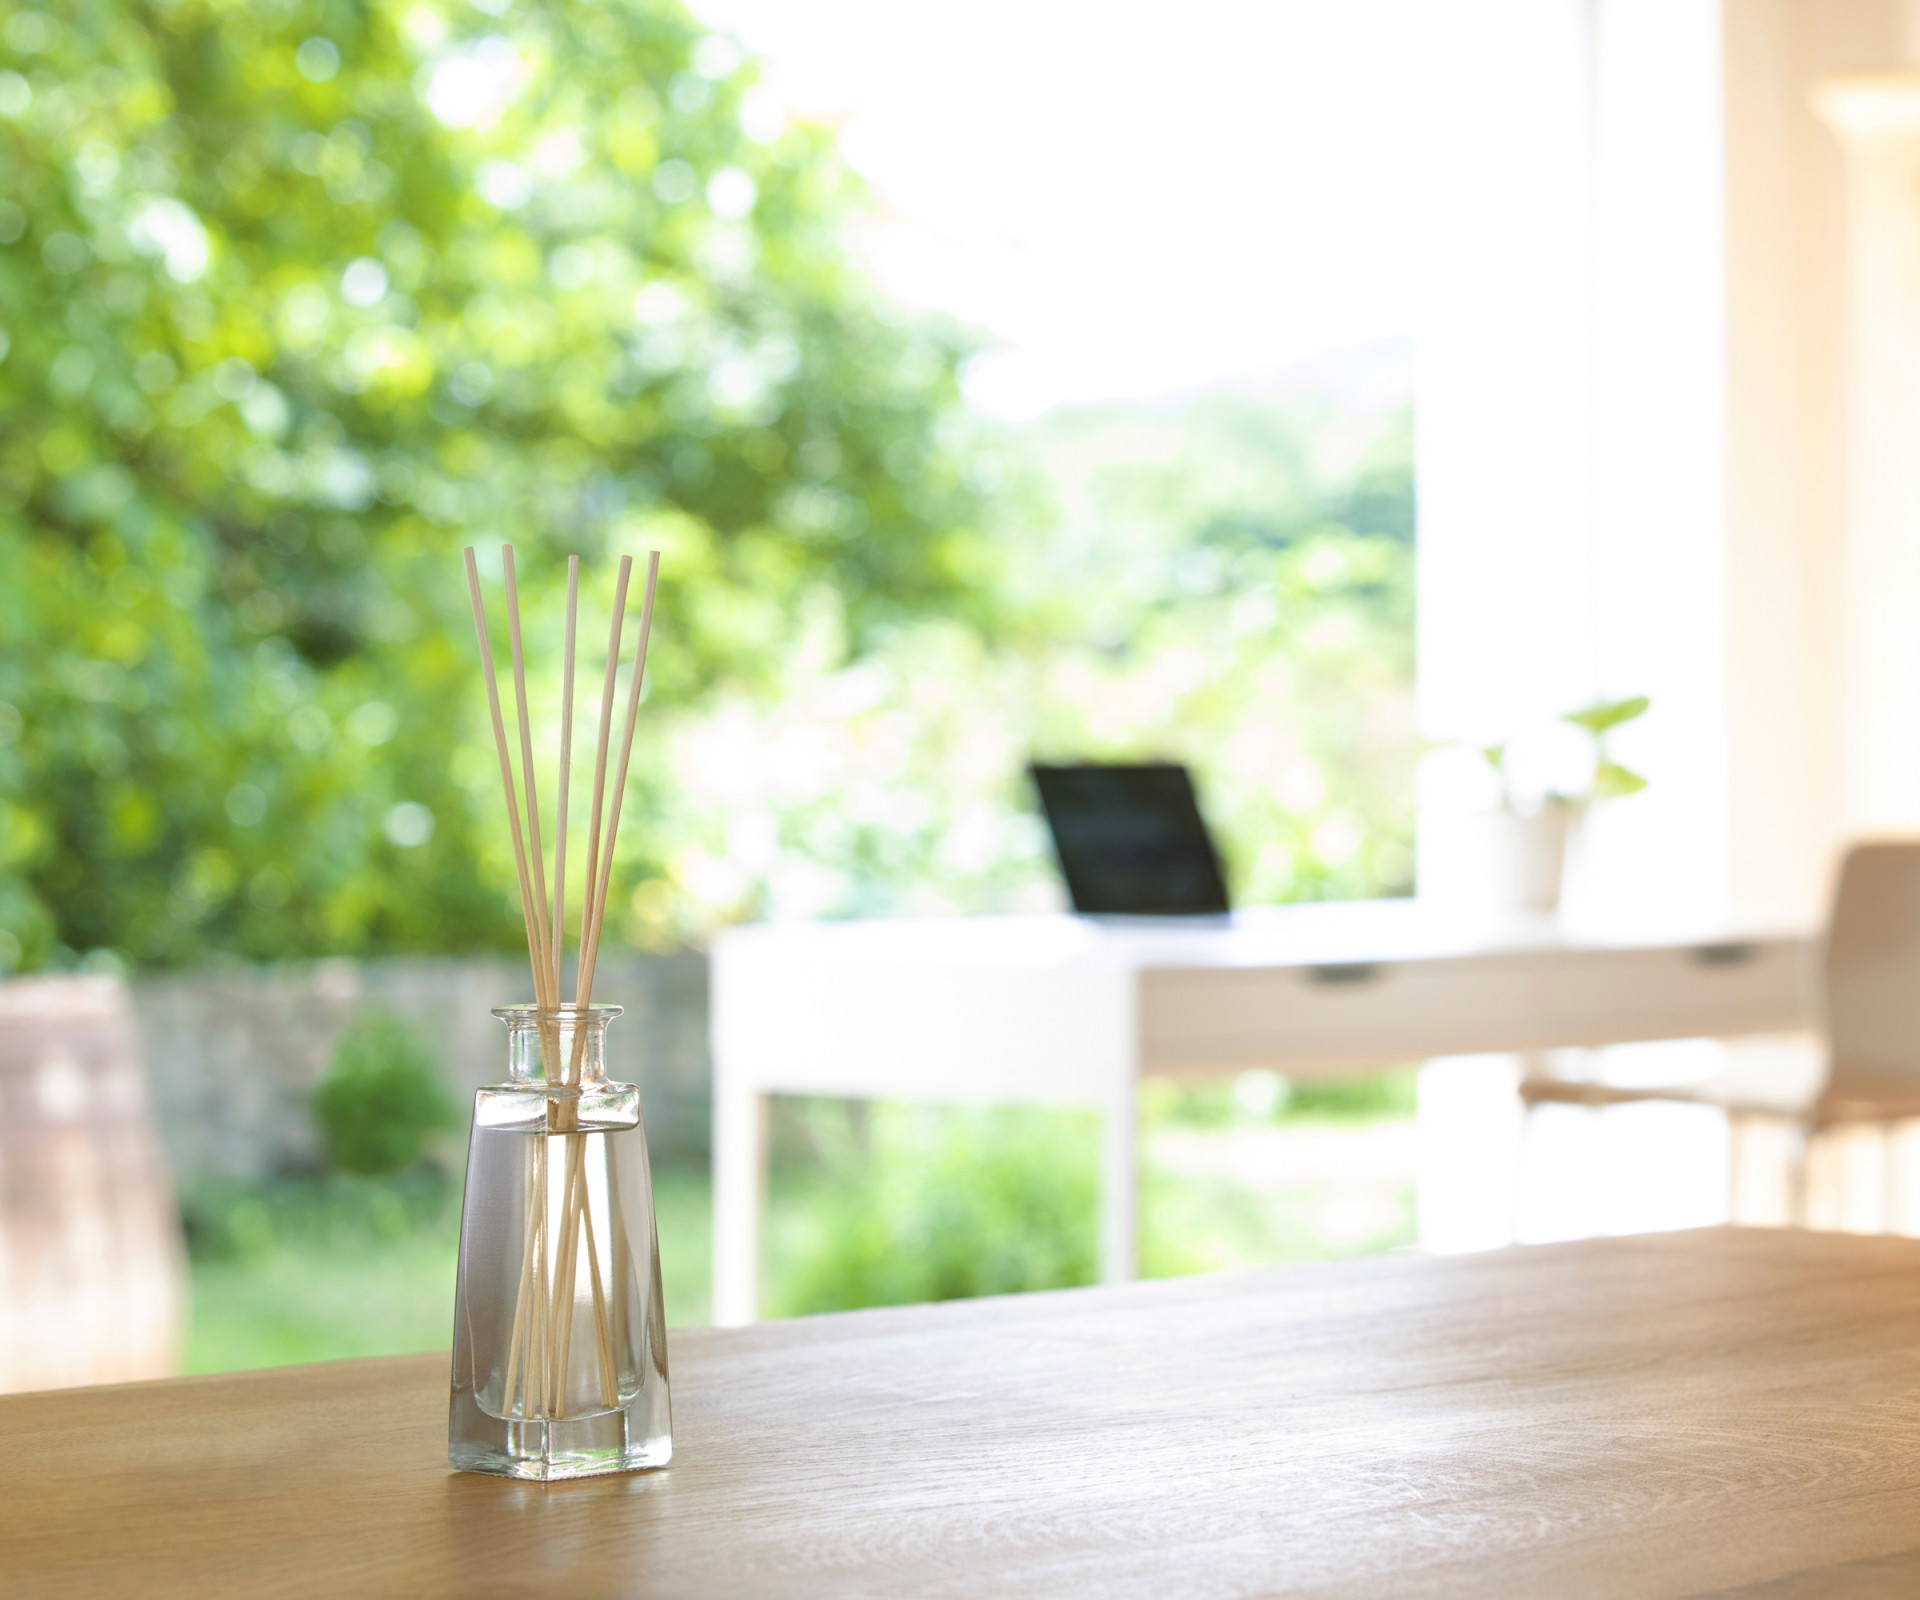 A Frosch Oase room freshener glass bottle with reed diffusers stands on a wooden table